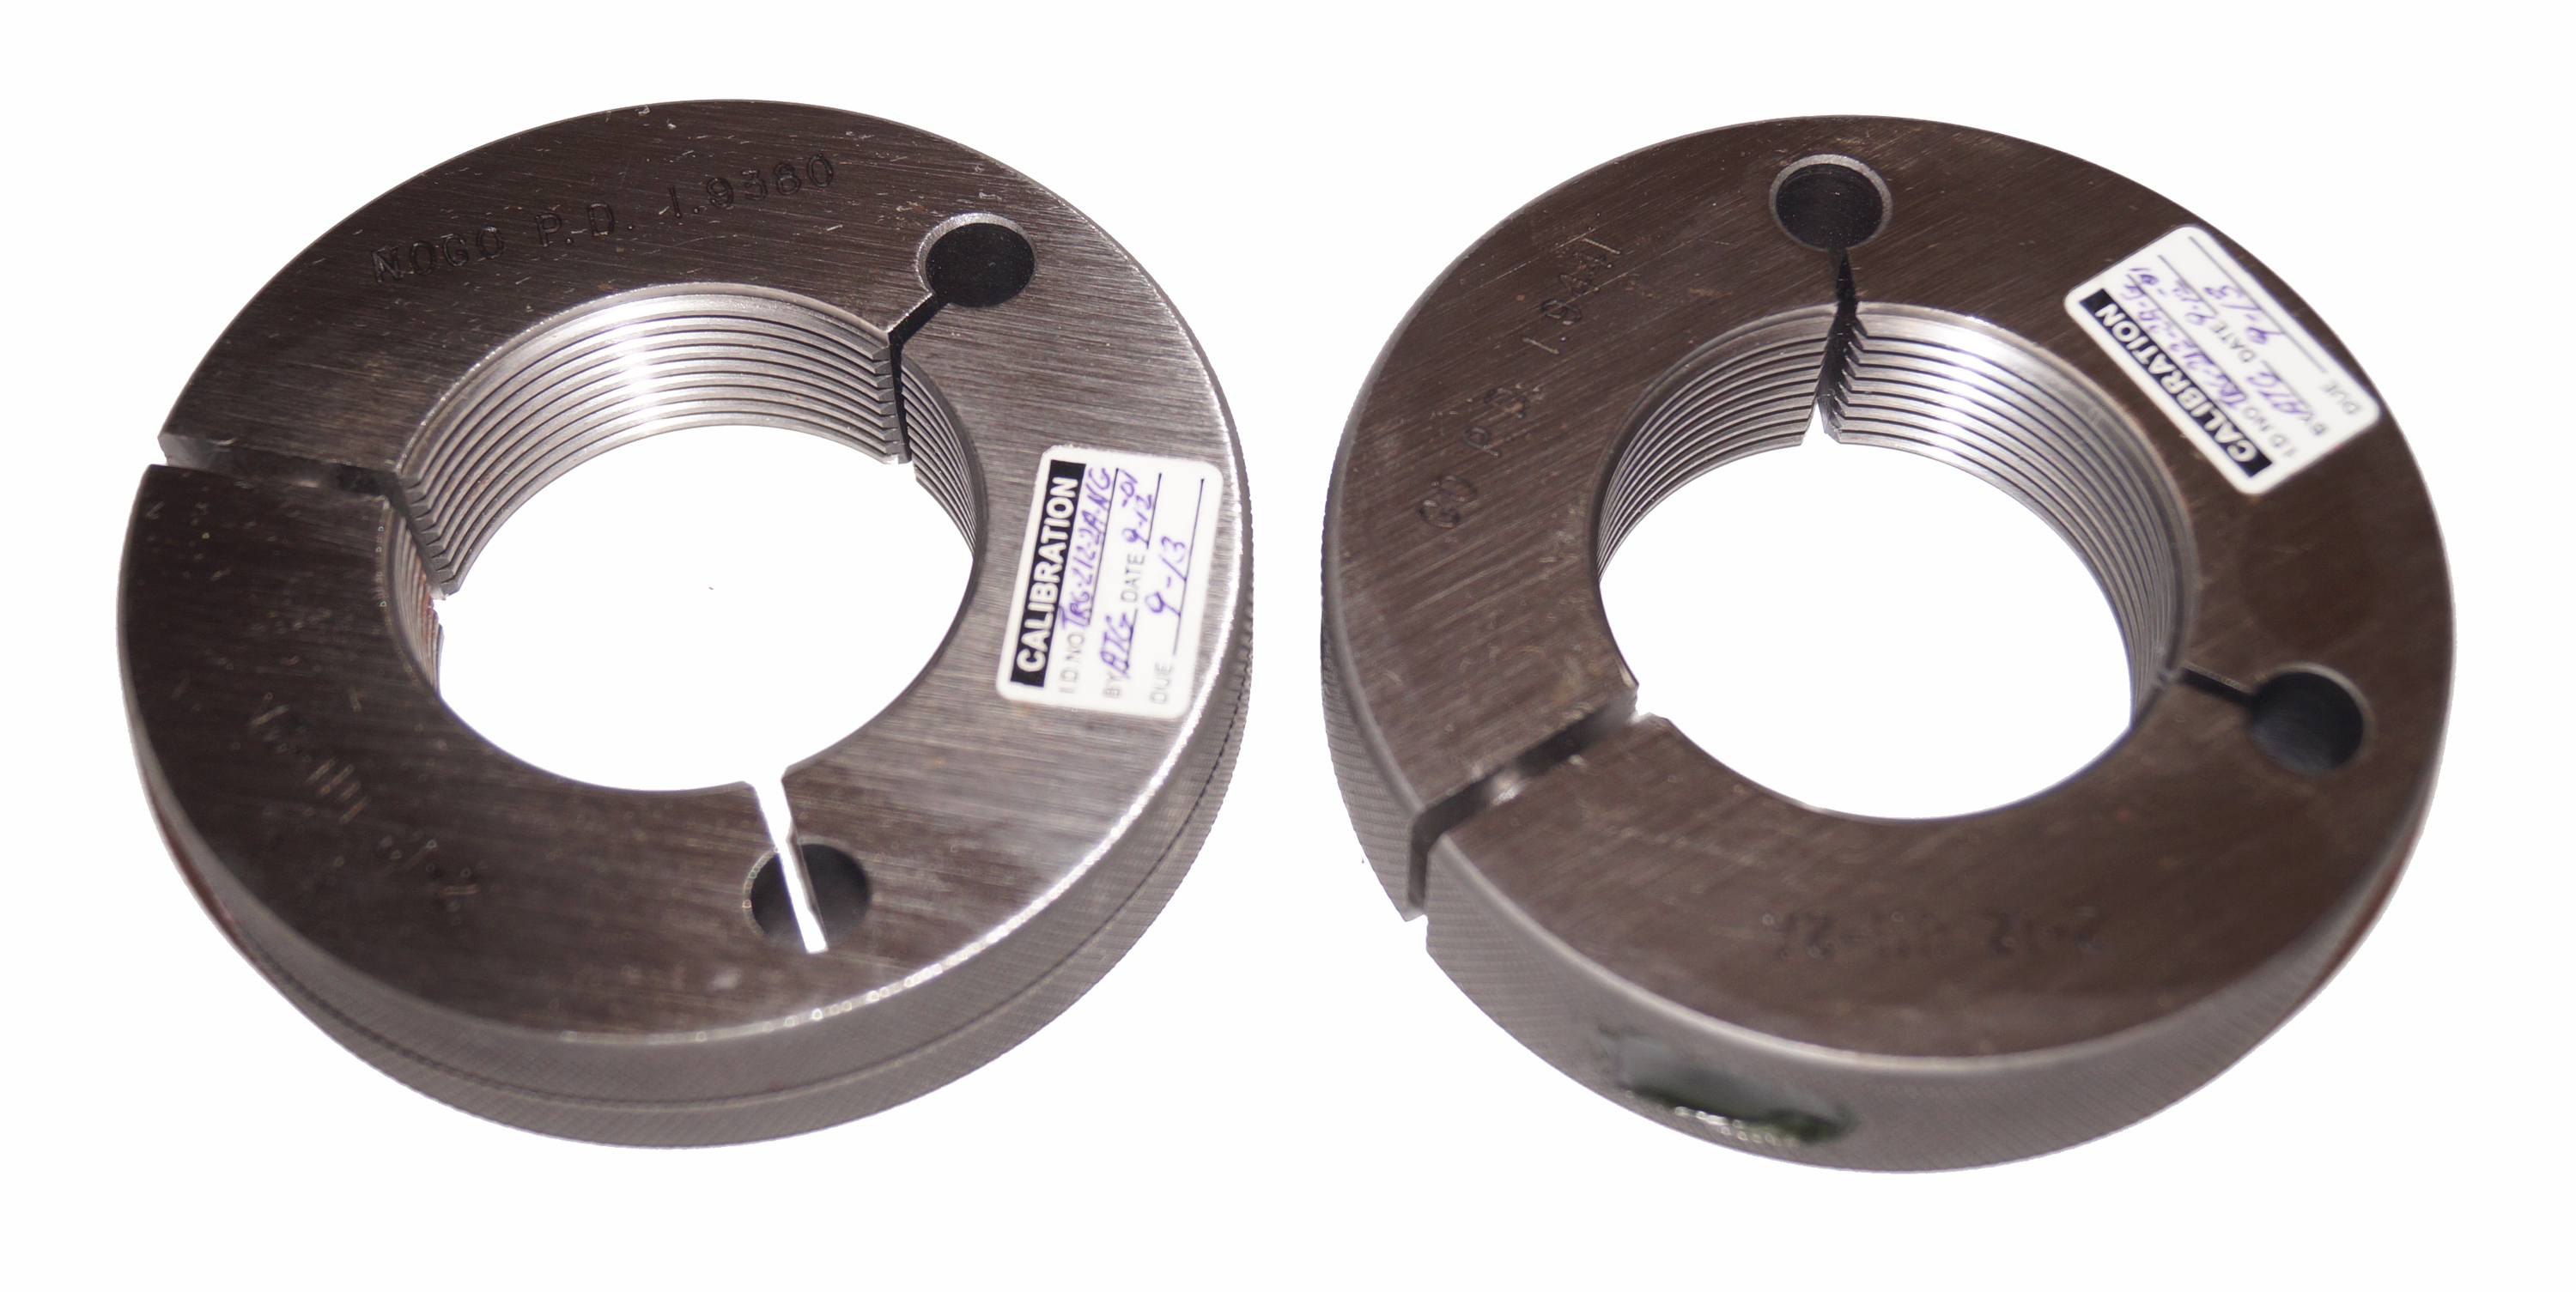 Details about   2" 12 NS 3 THREAD RING GAGE 2.0 GO ONLY P.D = 1.9459 UN NF 2 3A UNF 2.00 2.000 